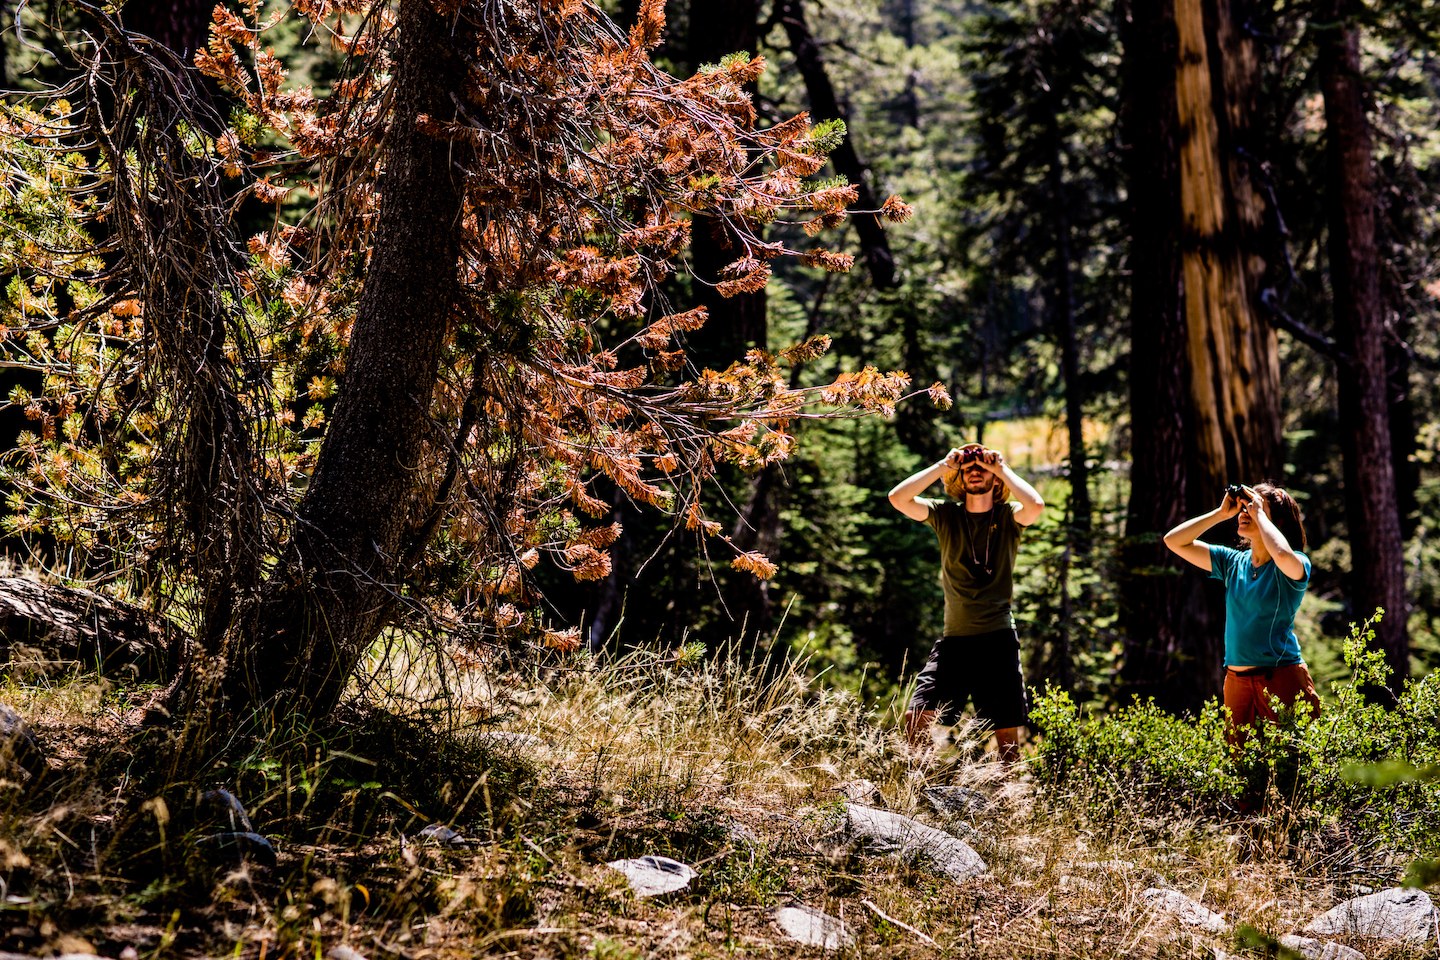 A research crew surveys trees for white pine blister rust disease in Sequoia and Kings Canyon national parks. (Clayton Boyd)